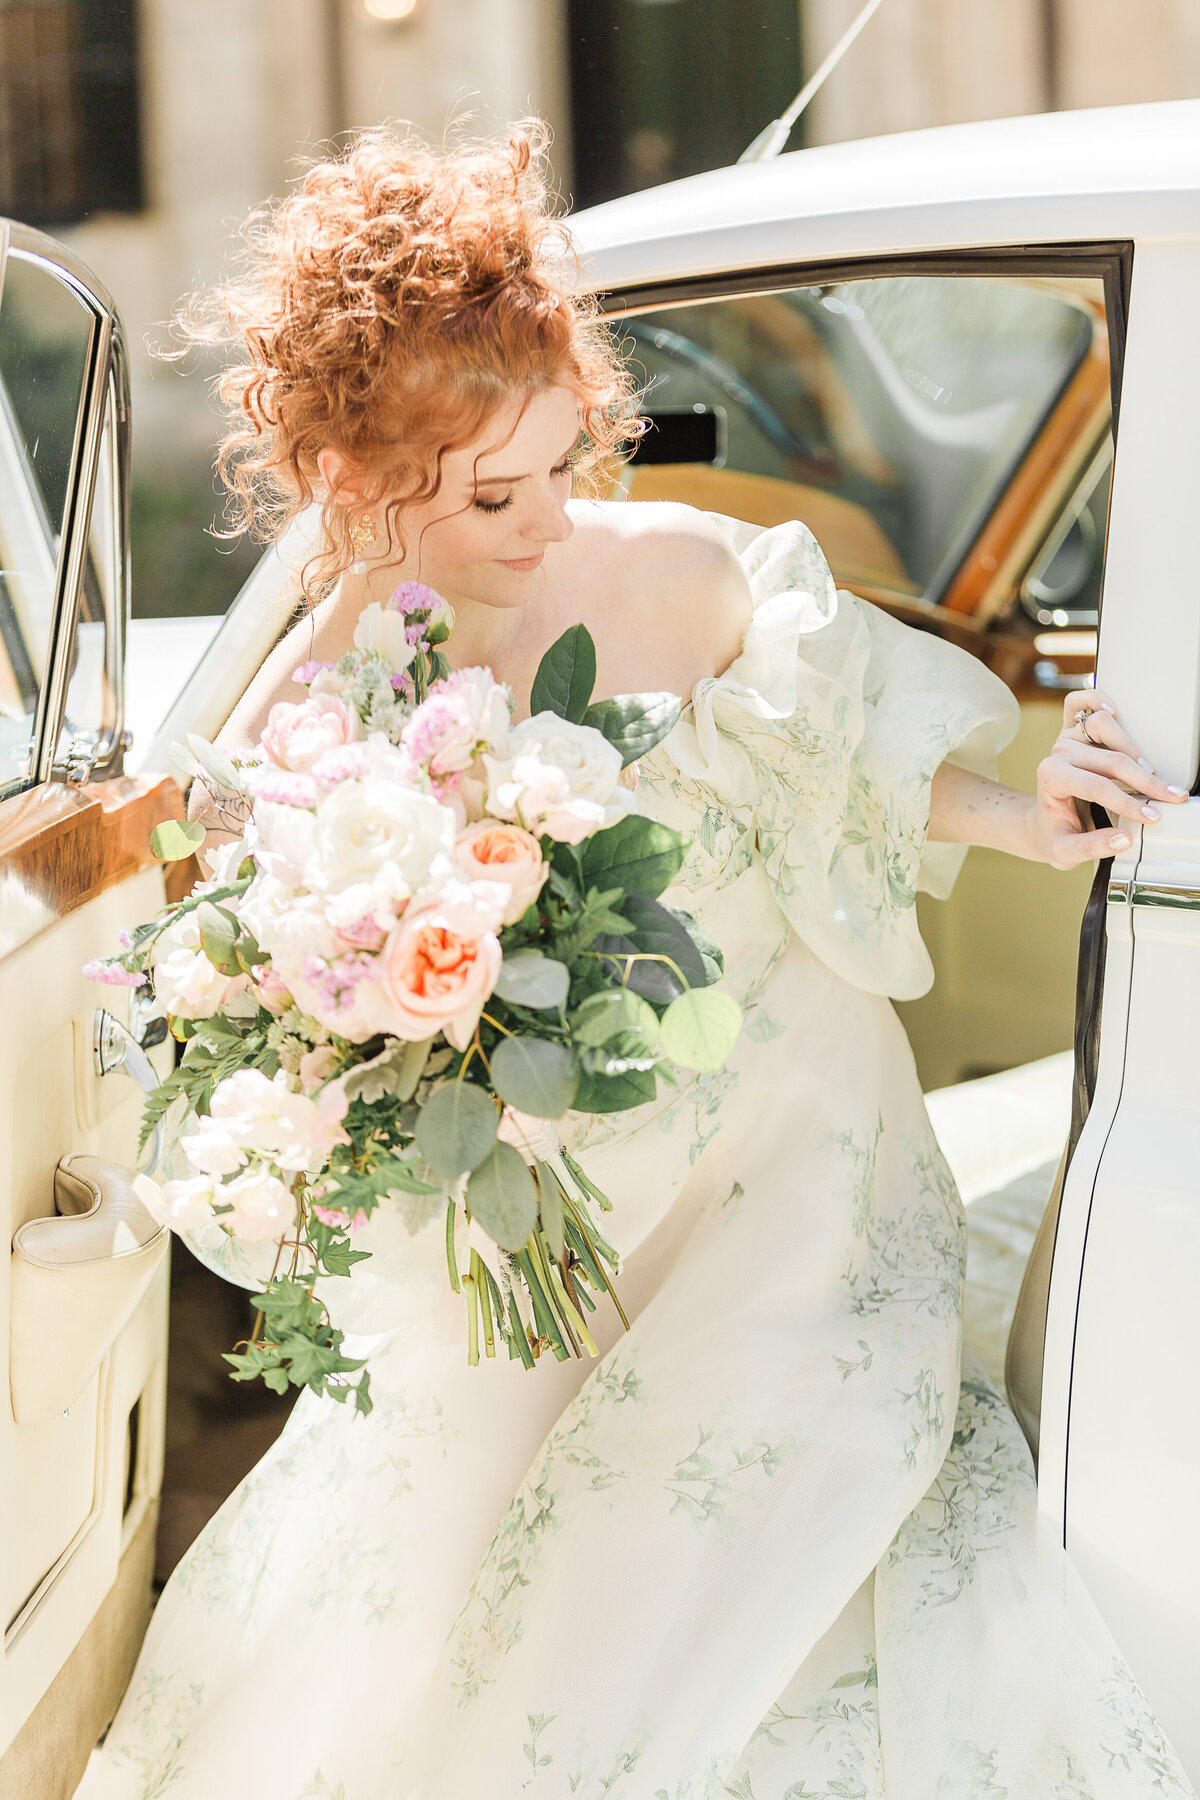 Bride with upswept curly red hair is gracefully getting out of a vintage rolls royce on her wedding day. North Shore Ipswitch wedding photography captured by Lia Rose Weddings.